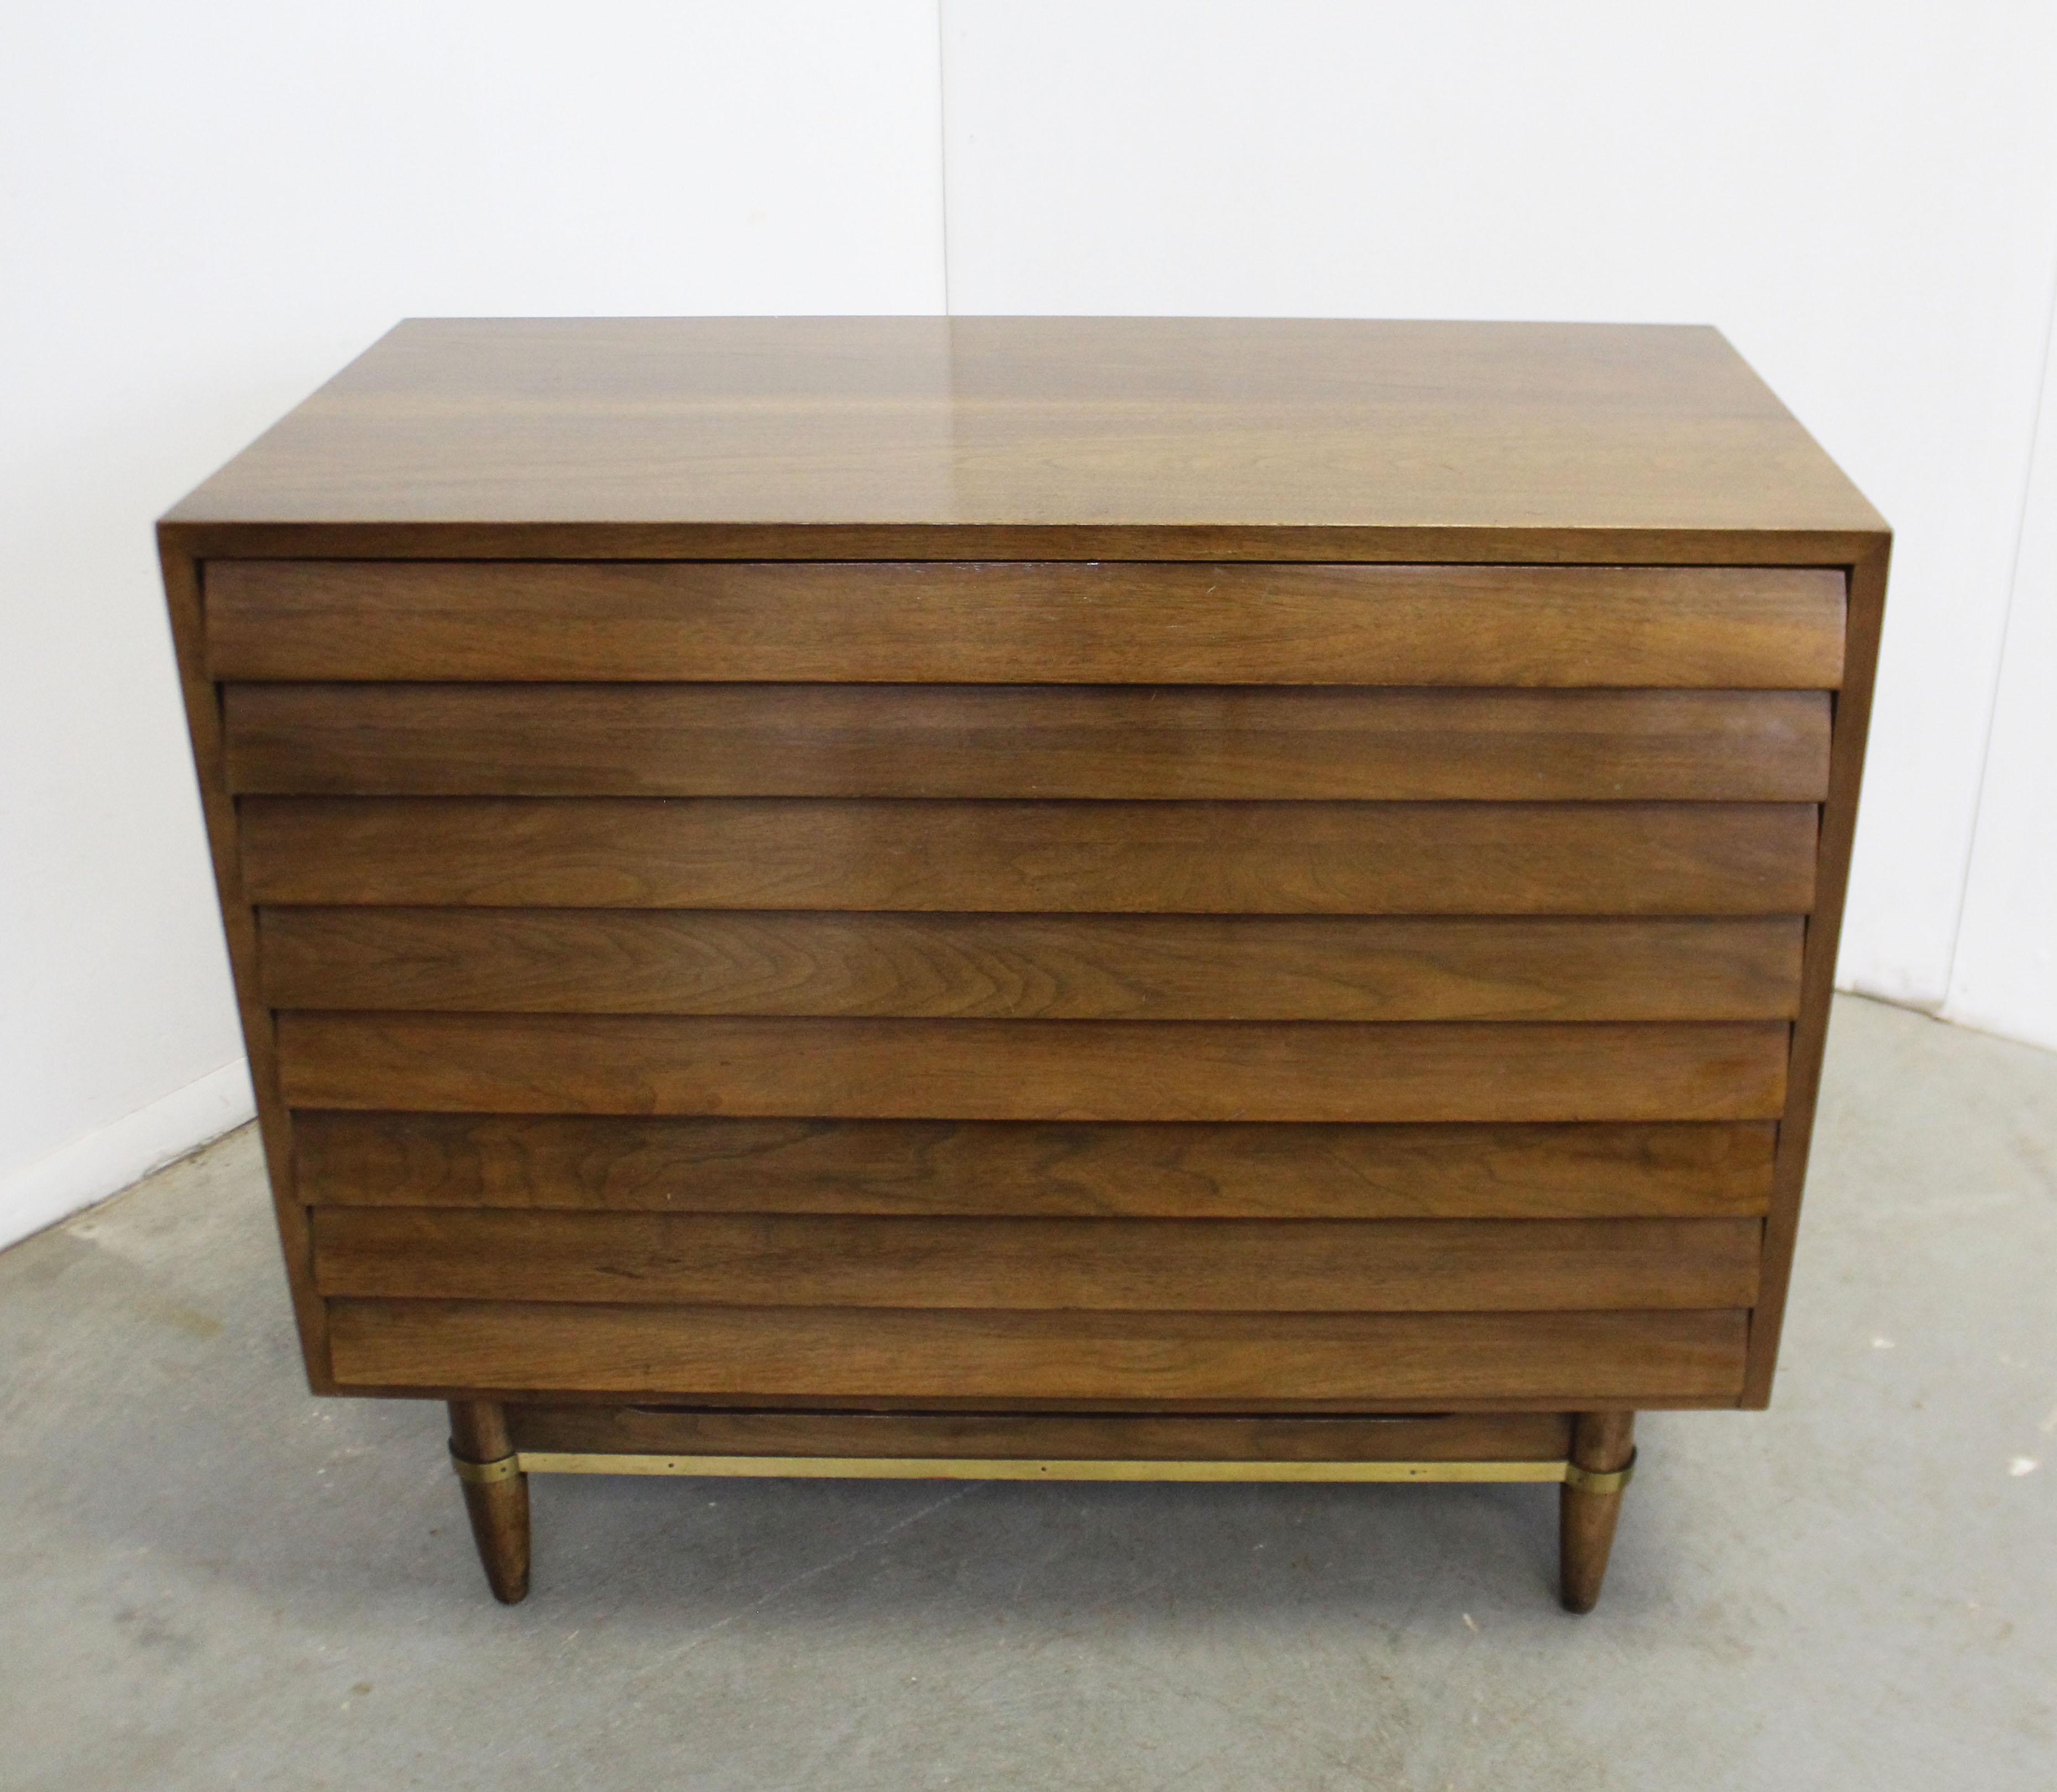 Offered is a bachelor chest, designed by Merton L. Gershun for American of Martinsville's 